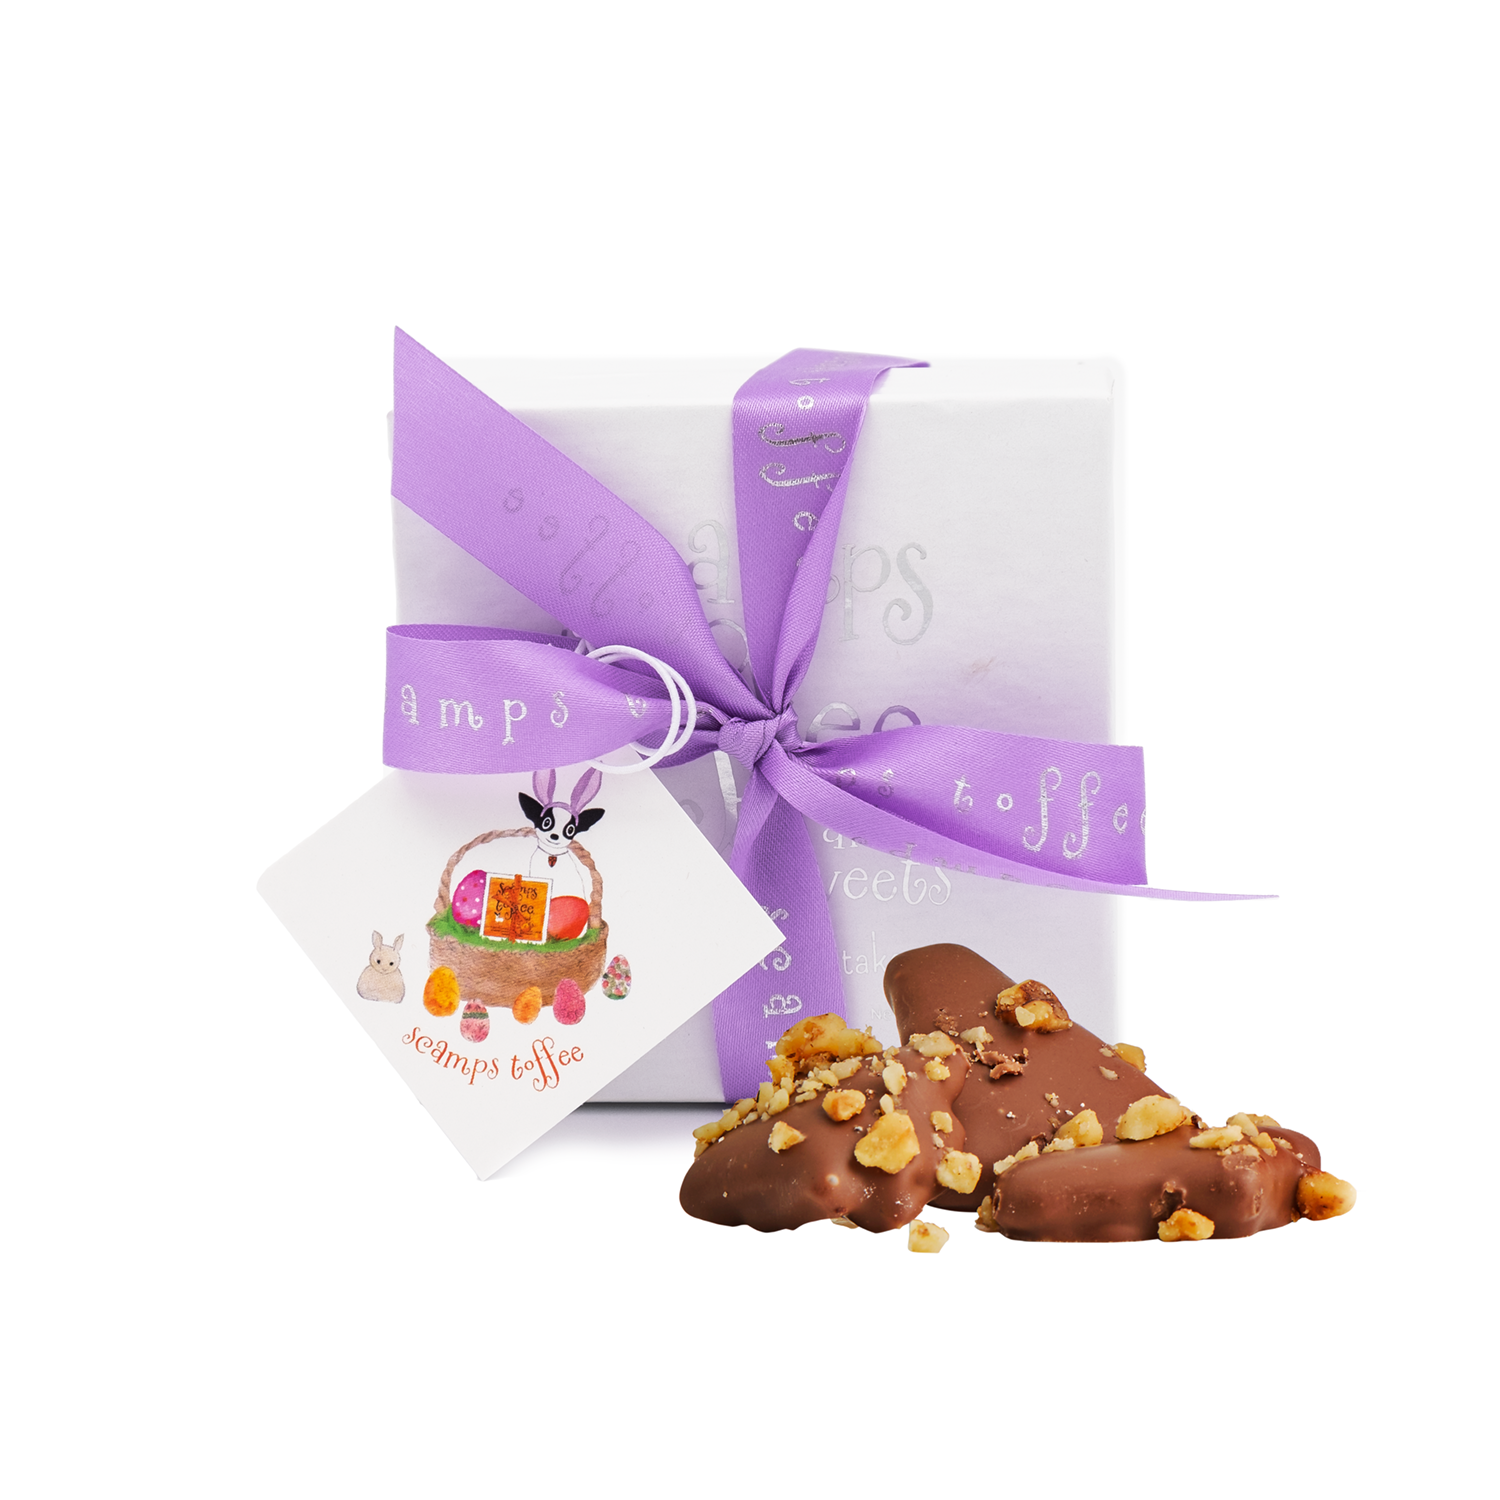 Scamps Toffee - 4oz Milk Chocolate Toffee Box - Easter with Tag